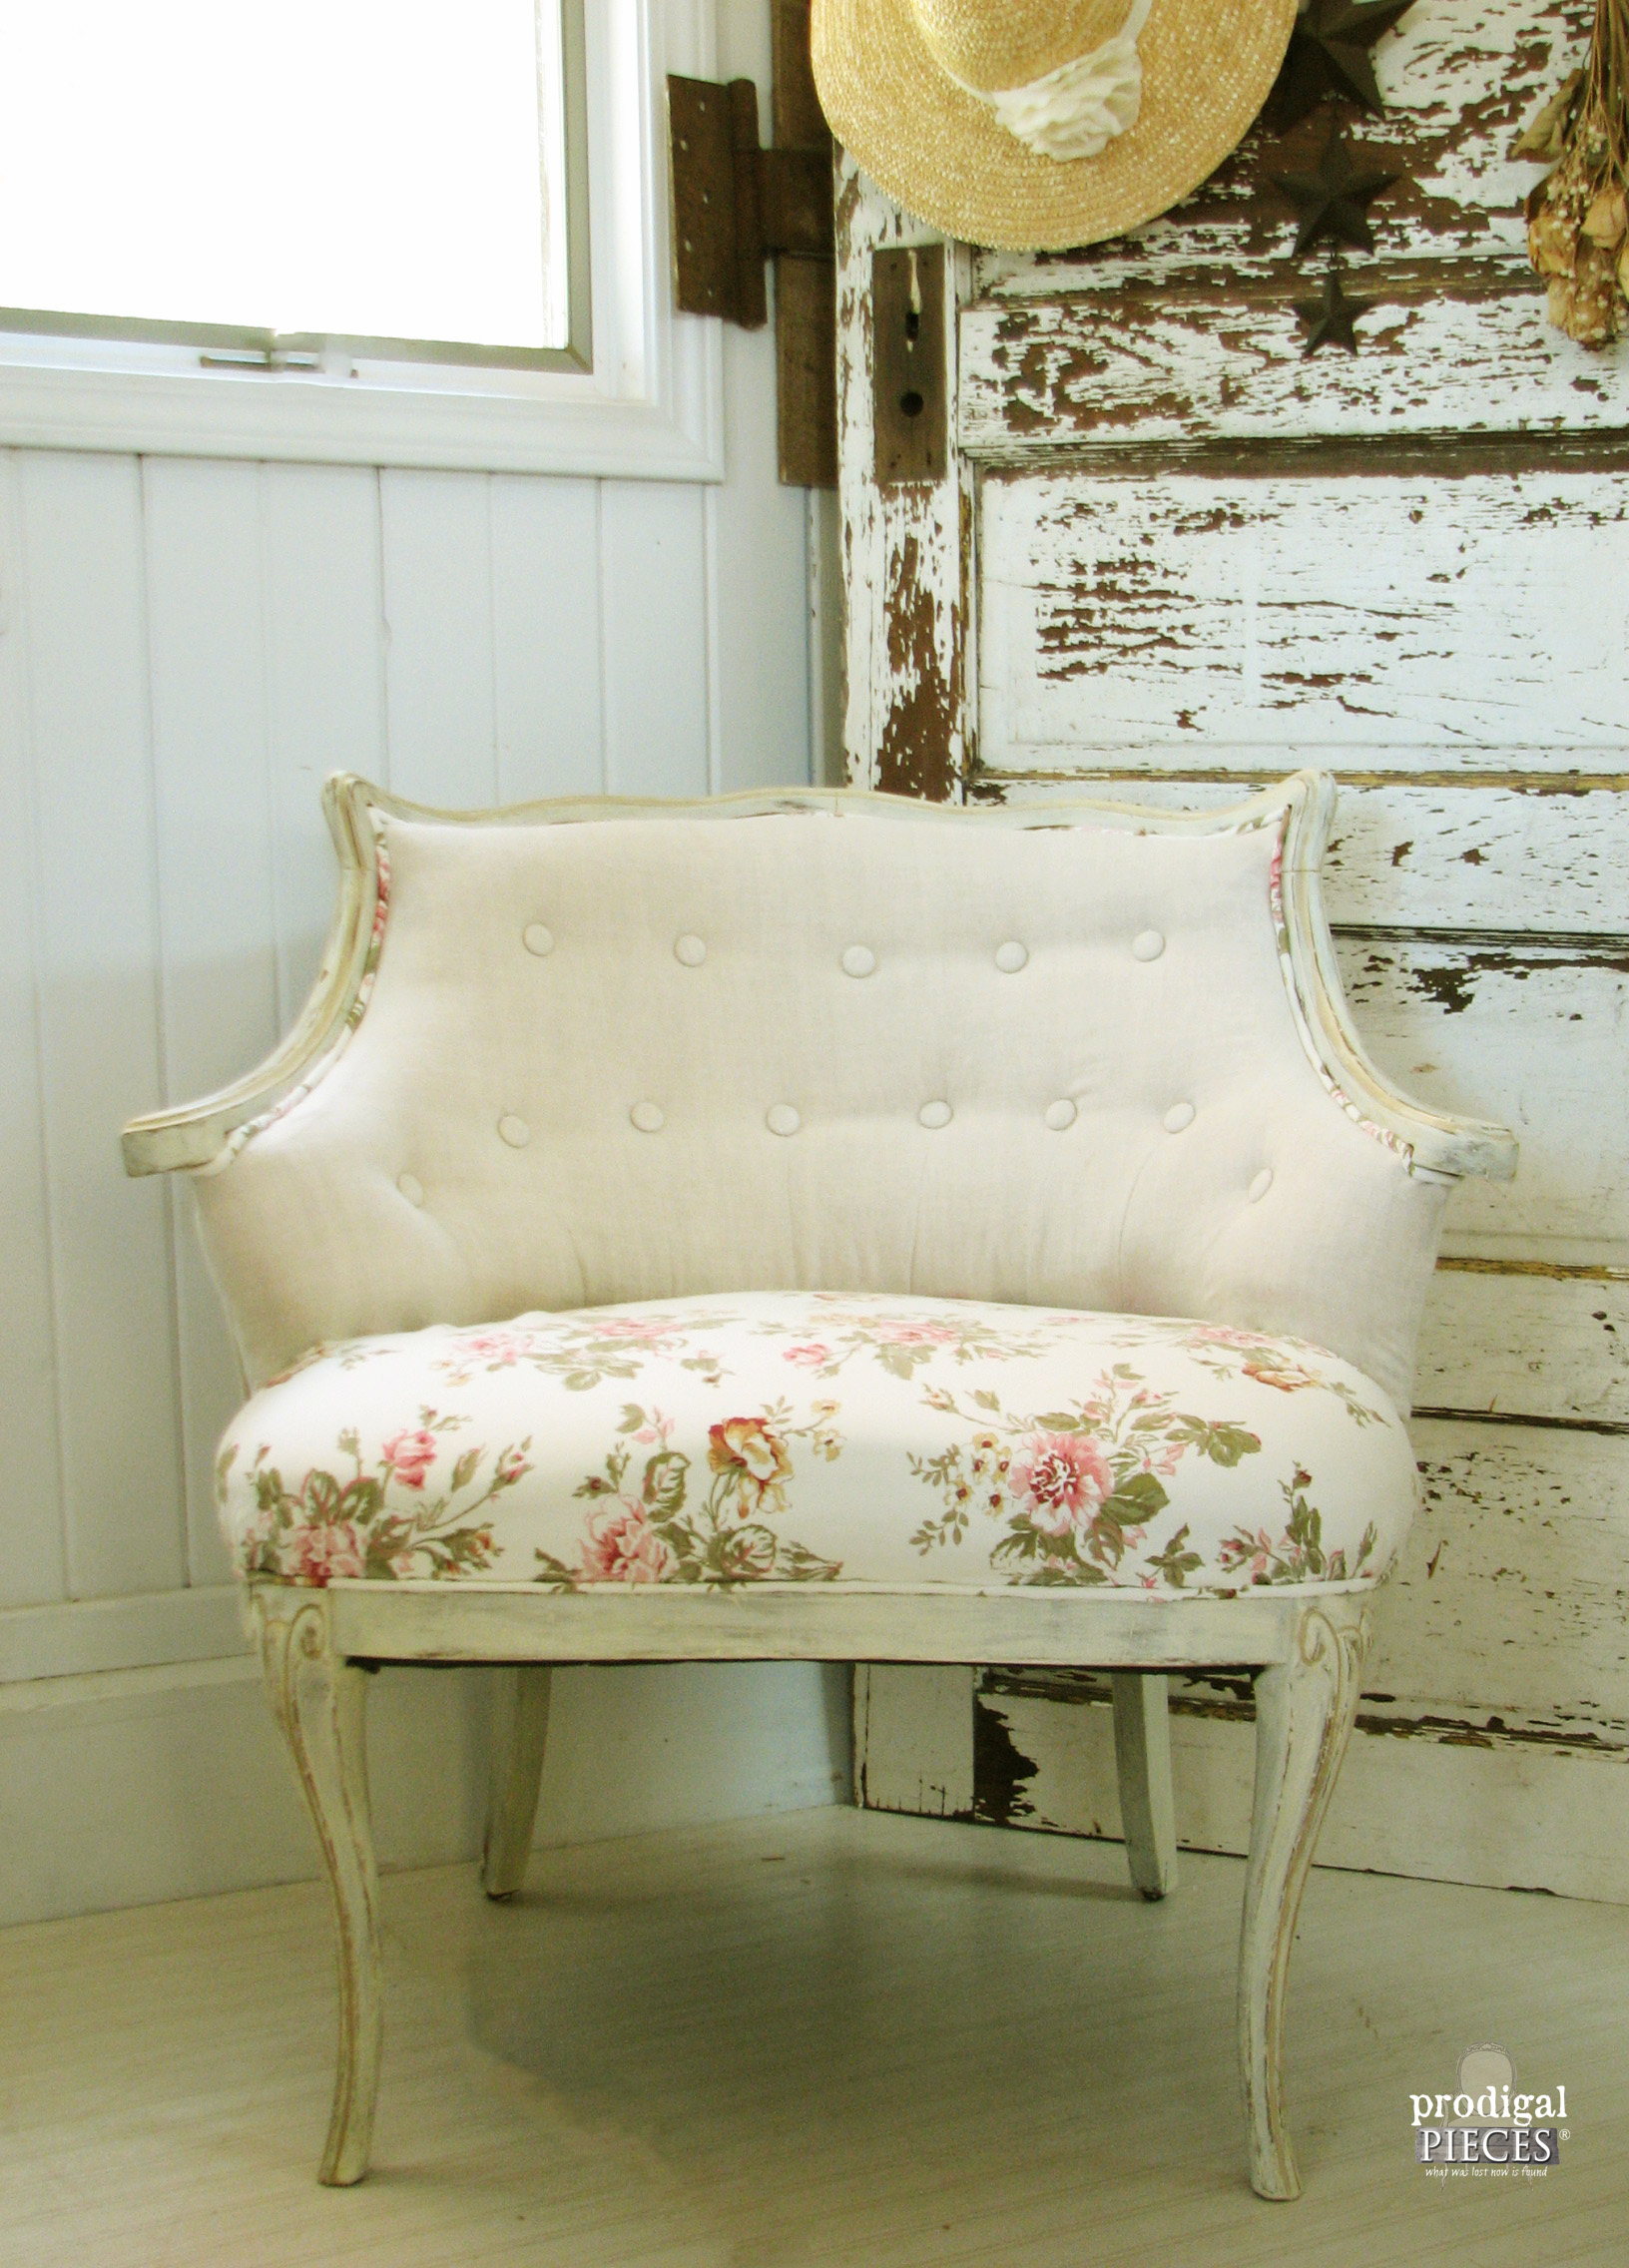 Vintage Tufted Chair with Awfully Itchy Fabric Gets Shabby Chic Makeover by Prodigal Pieces www.prodigalpieces.com #prodigalpieces